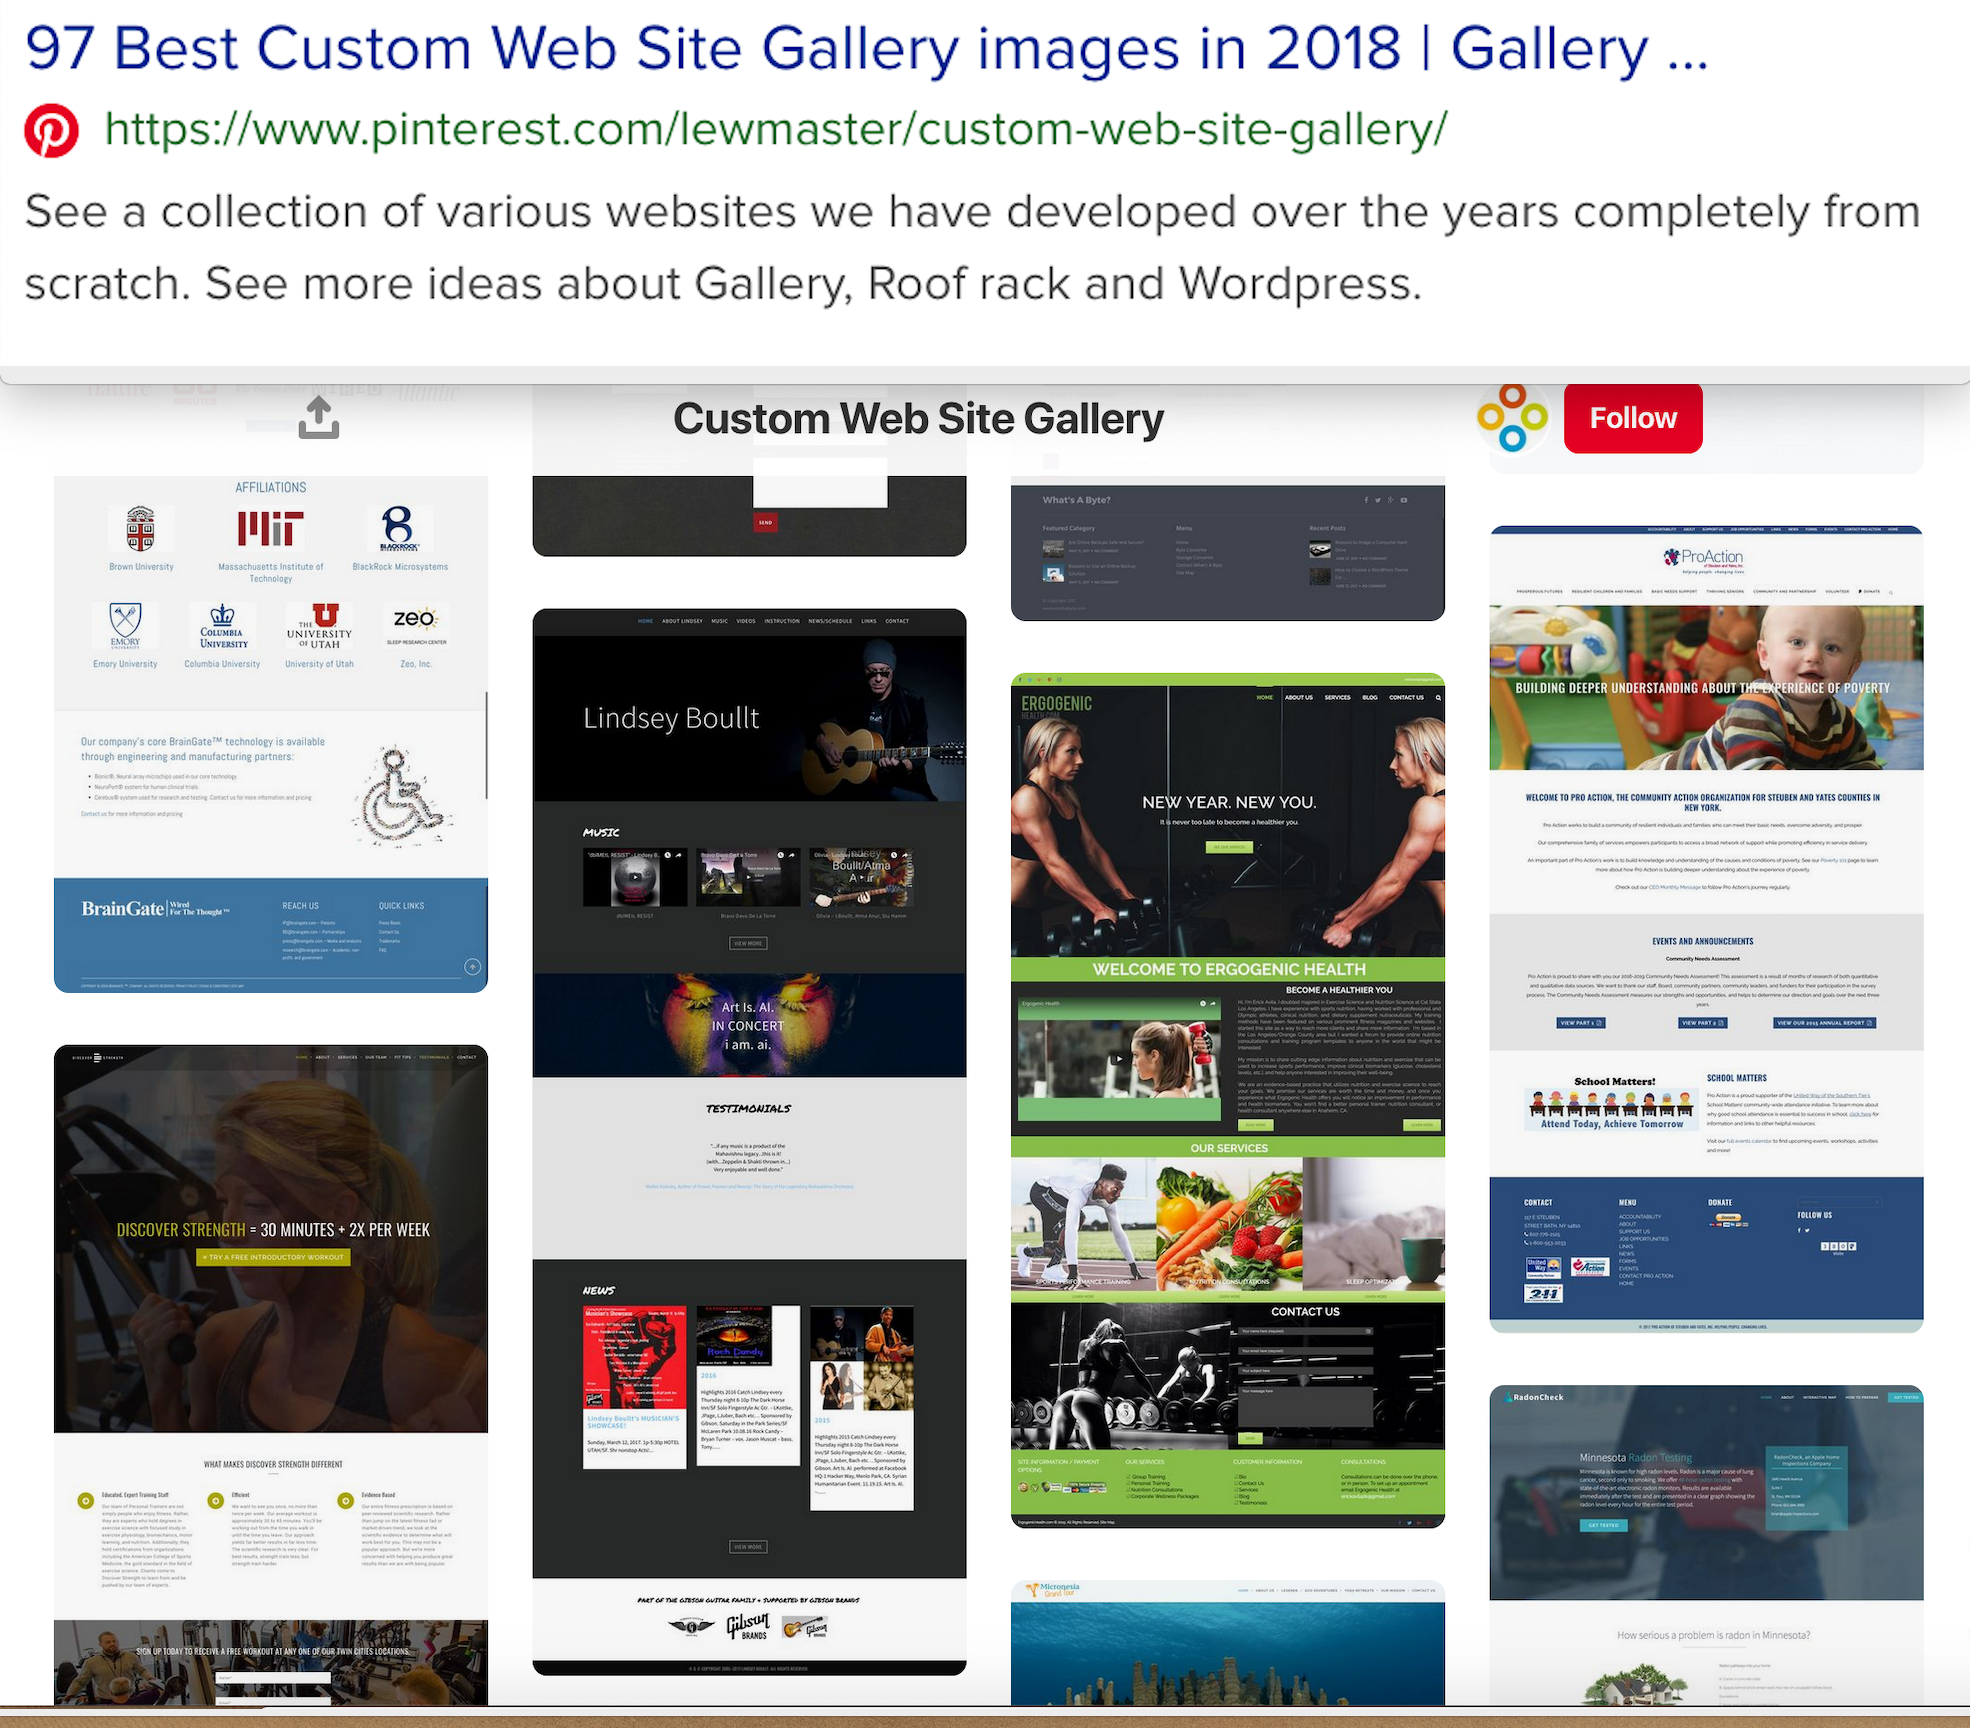 A picture of the best custom web site gallery images in 2 0 1 8.